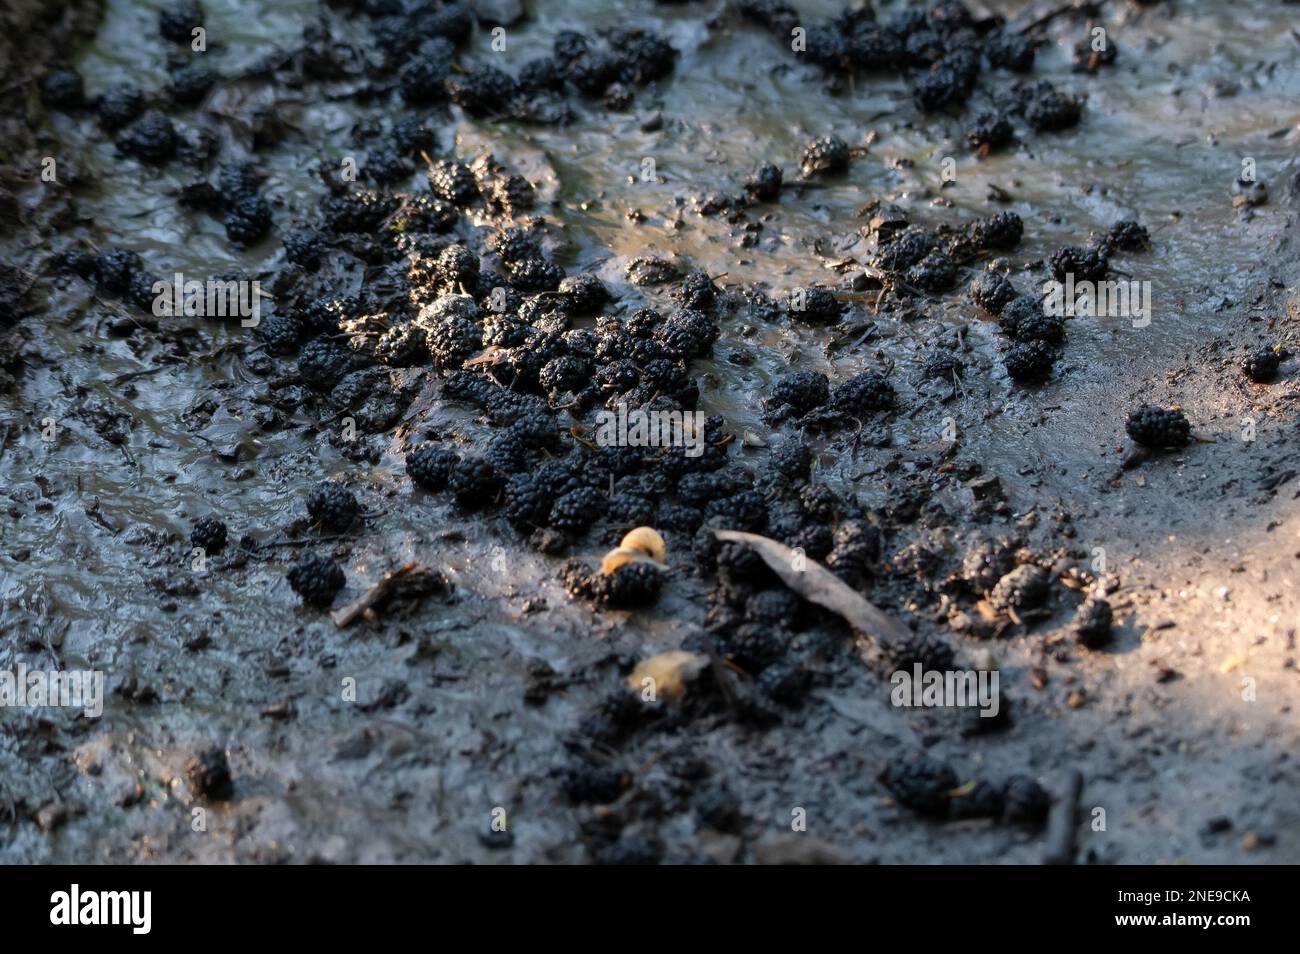 View of black mulberries on the muddy ground, close-up photo. Stock Photo